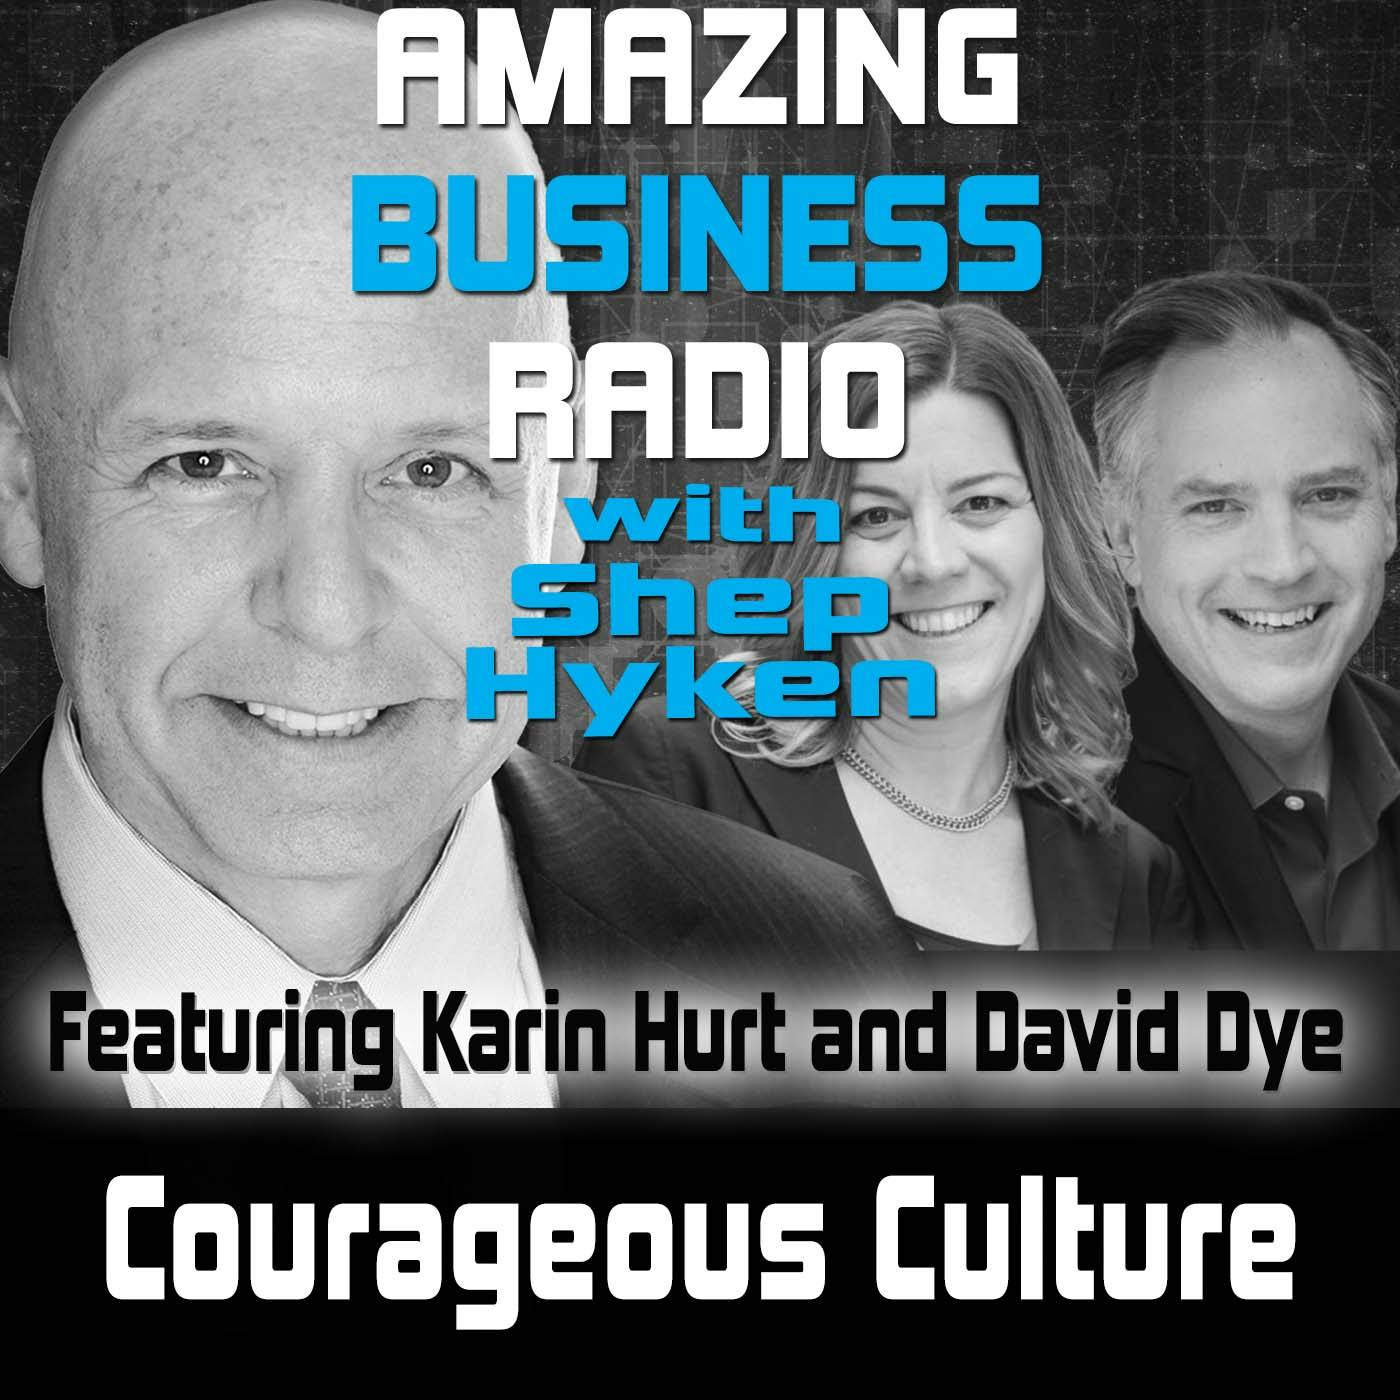 Courageous Culture Featuring Karin Hurt and David Dye